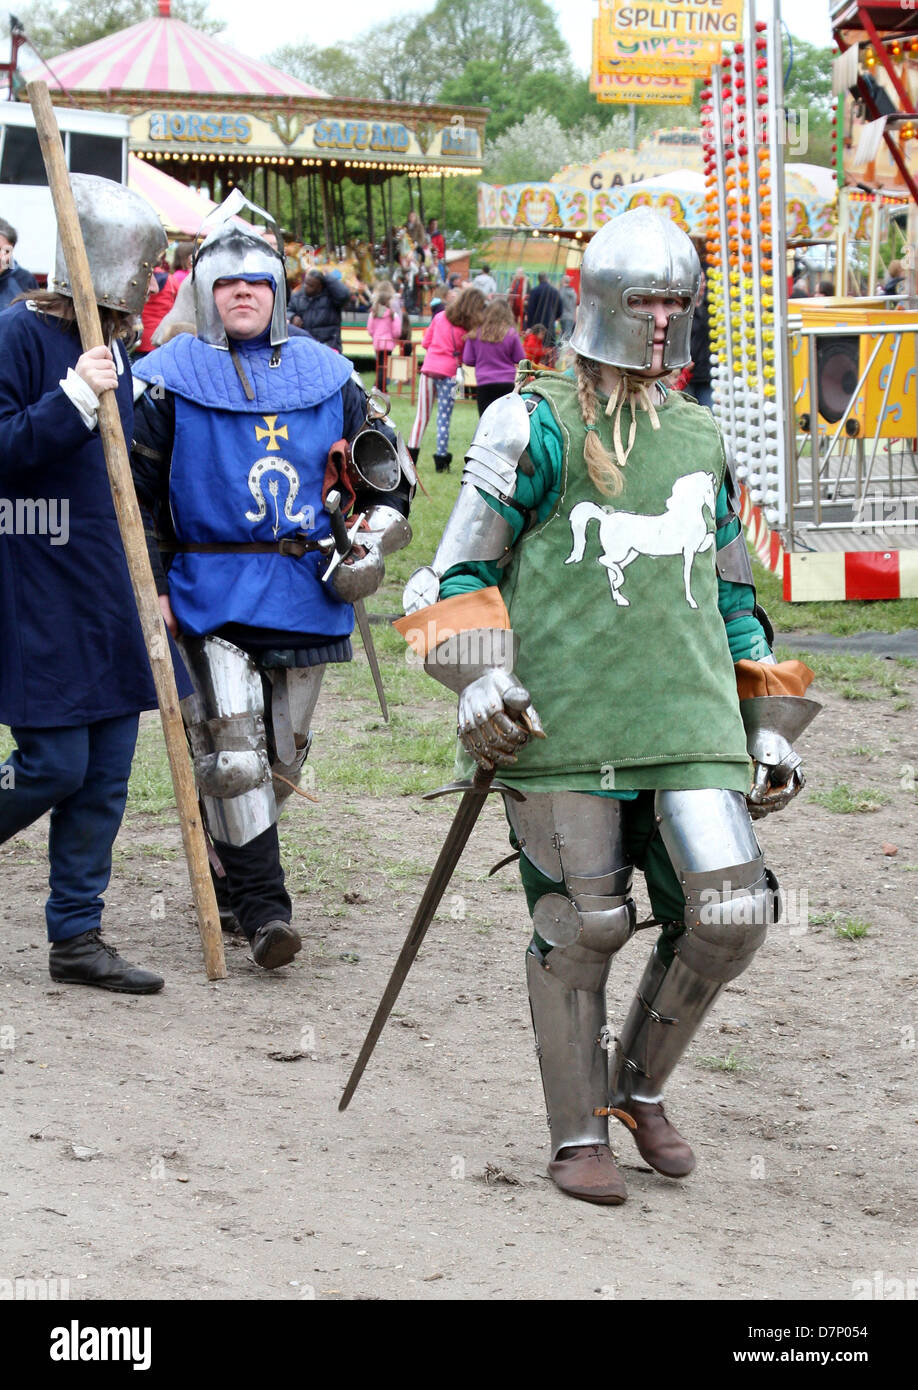 Stotfold Mill, Bedfordshire, UK. May 11th 2013. Medieval Characters Stotfold Steam Fair and Country Show at Stotfold Mill, Bedfordshire - May 11th 2013  Photo by Keith Mayhew/Alamy Live News Stock Photo